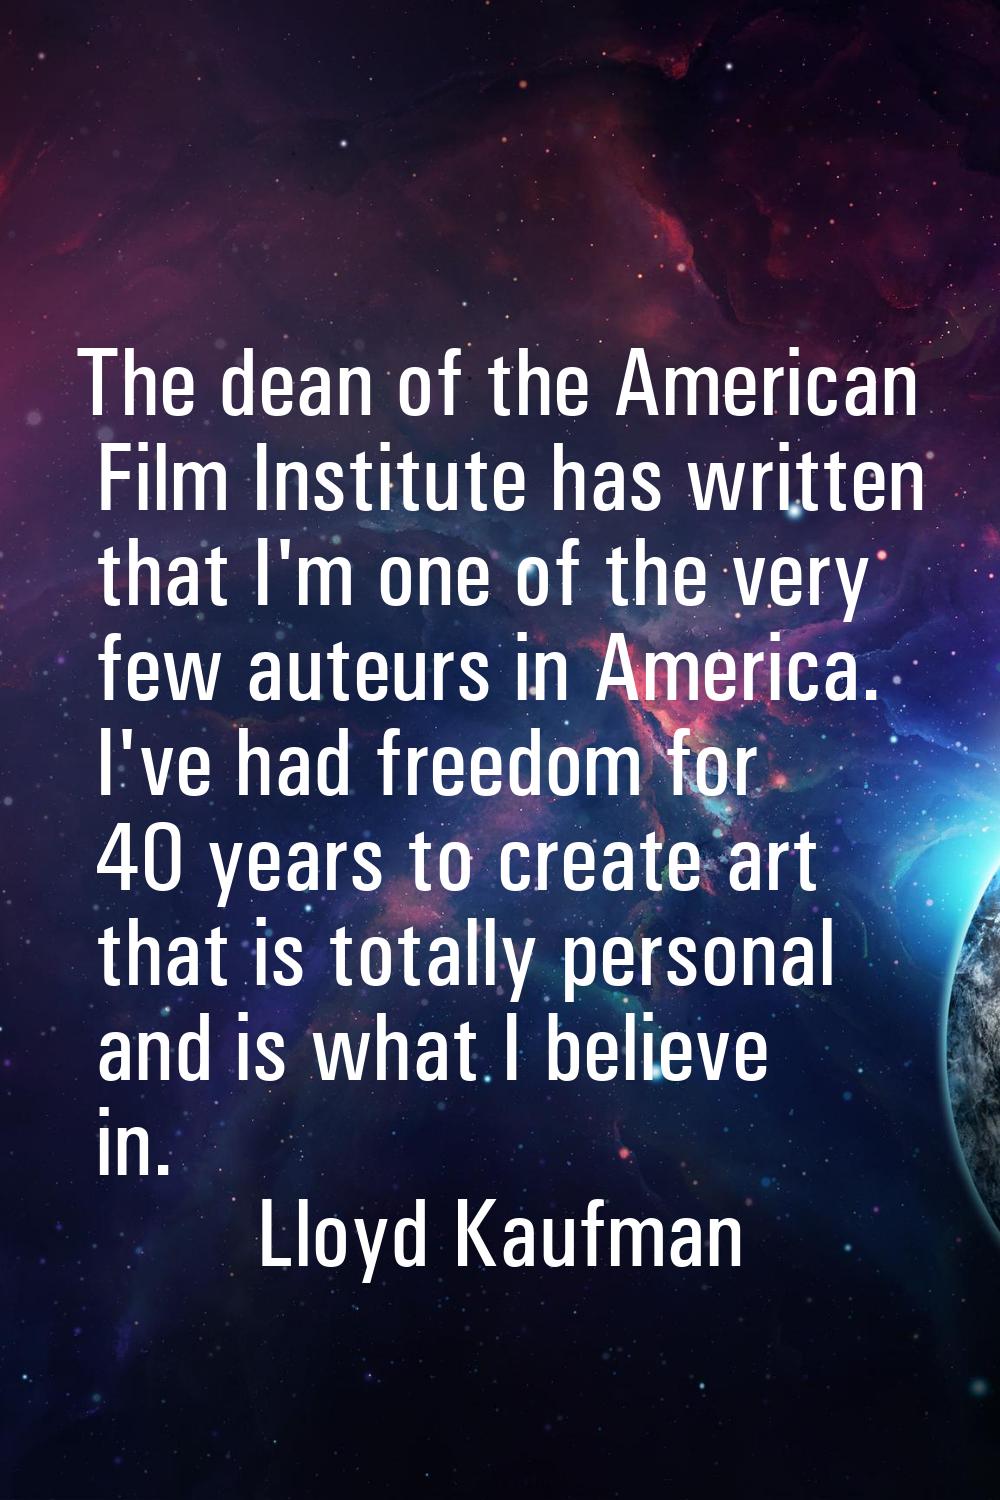 The dean of the American Film Institute has written that I'm one of the very few auteurs in America